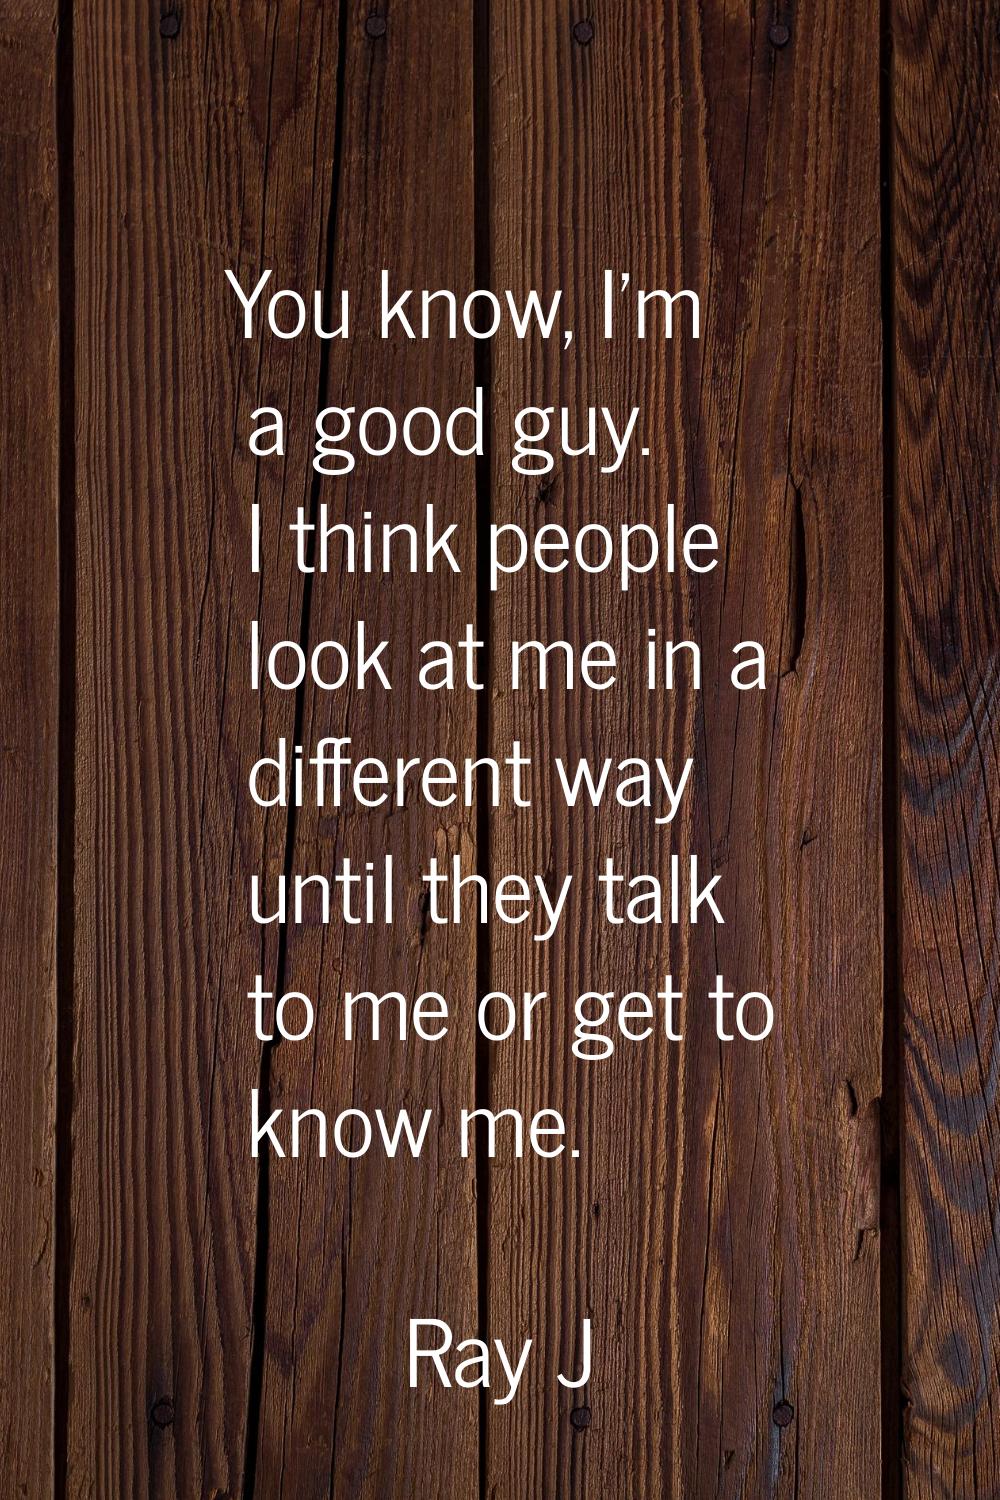 You know, I'm a good guy. I think people look at me in a different way until they talk to me or get